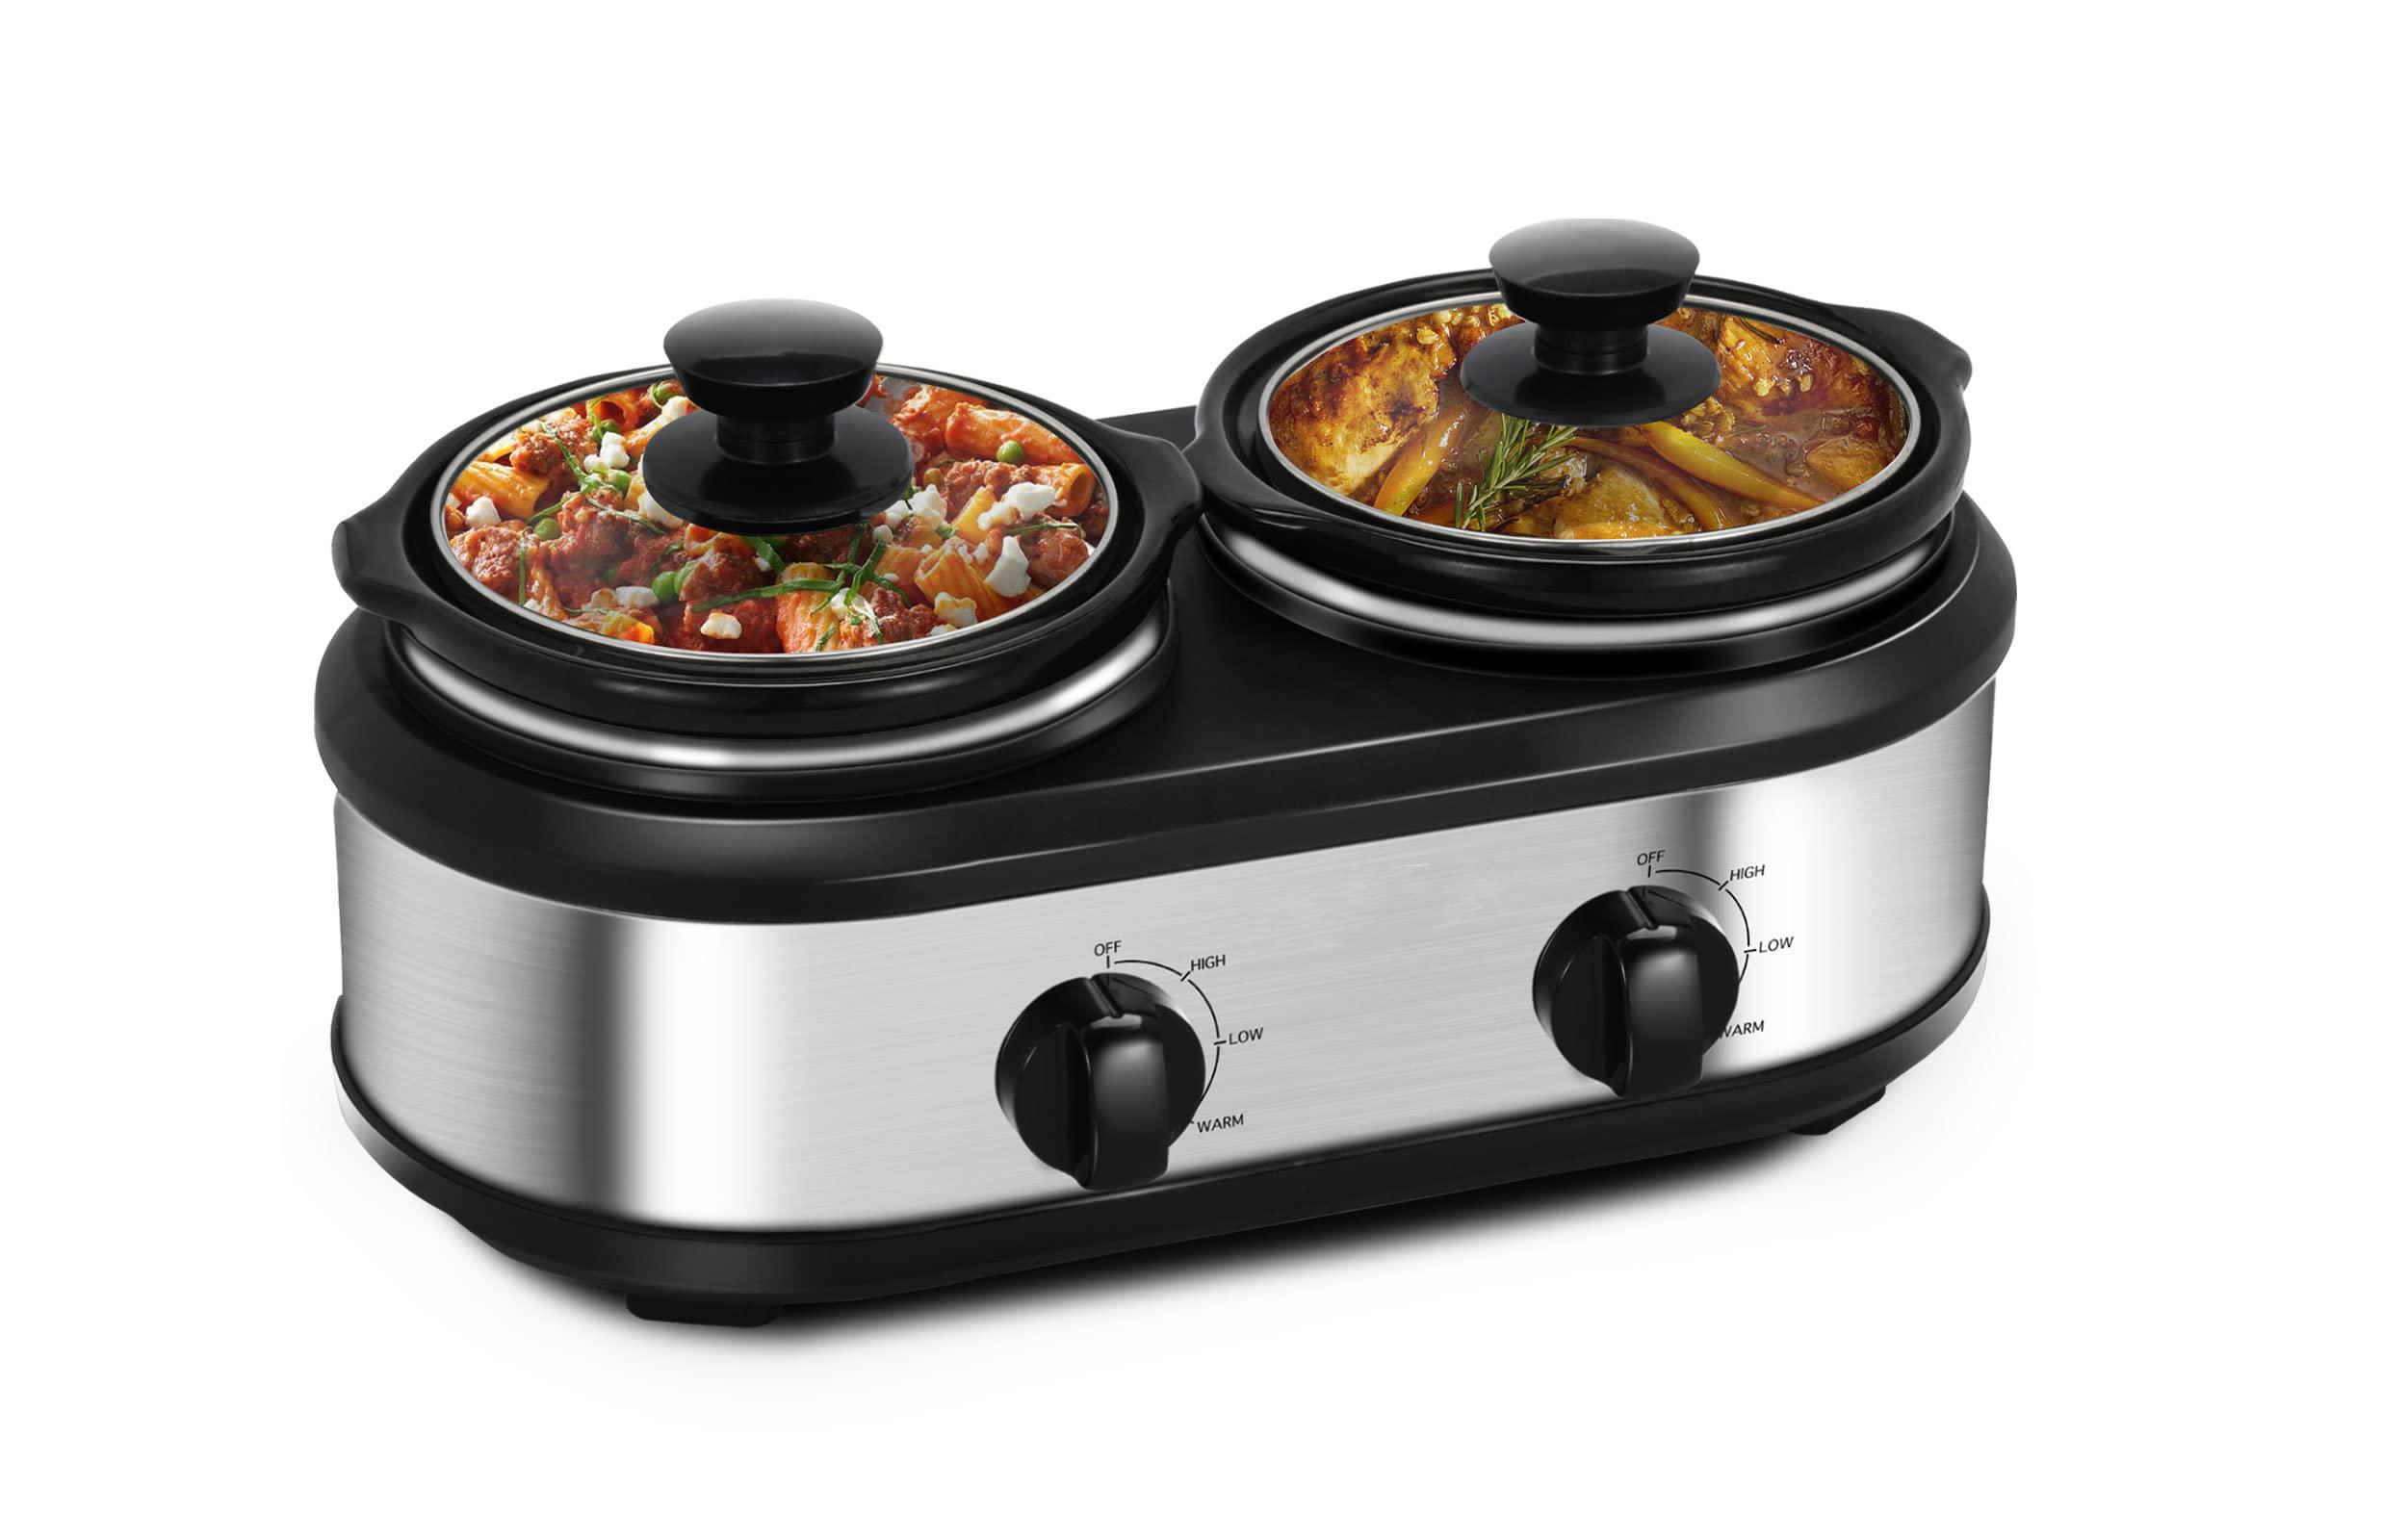 X WINDAZE RNAB0B8ZVC4H8 dual slow cooker, buffet servers and warmers with 2  x 1.25qt, tempered glass lids and lid rests, 3 adjustable temp, stainless